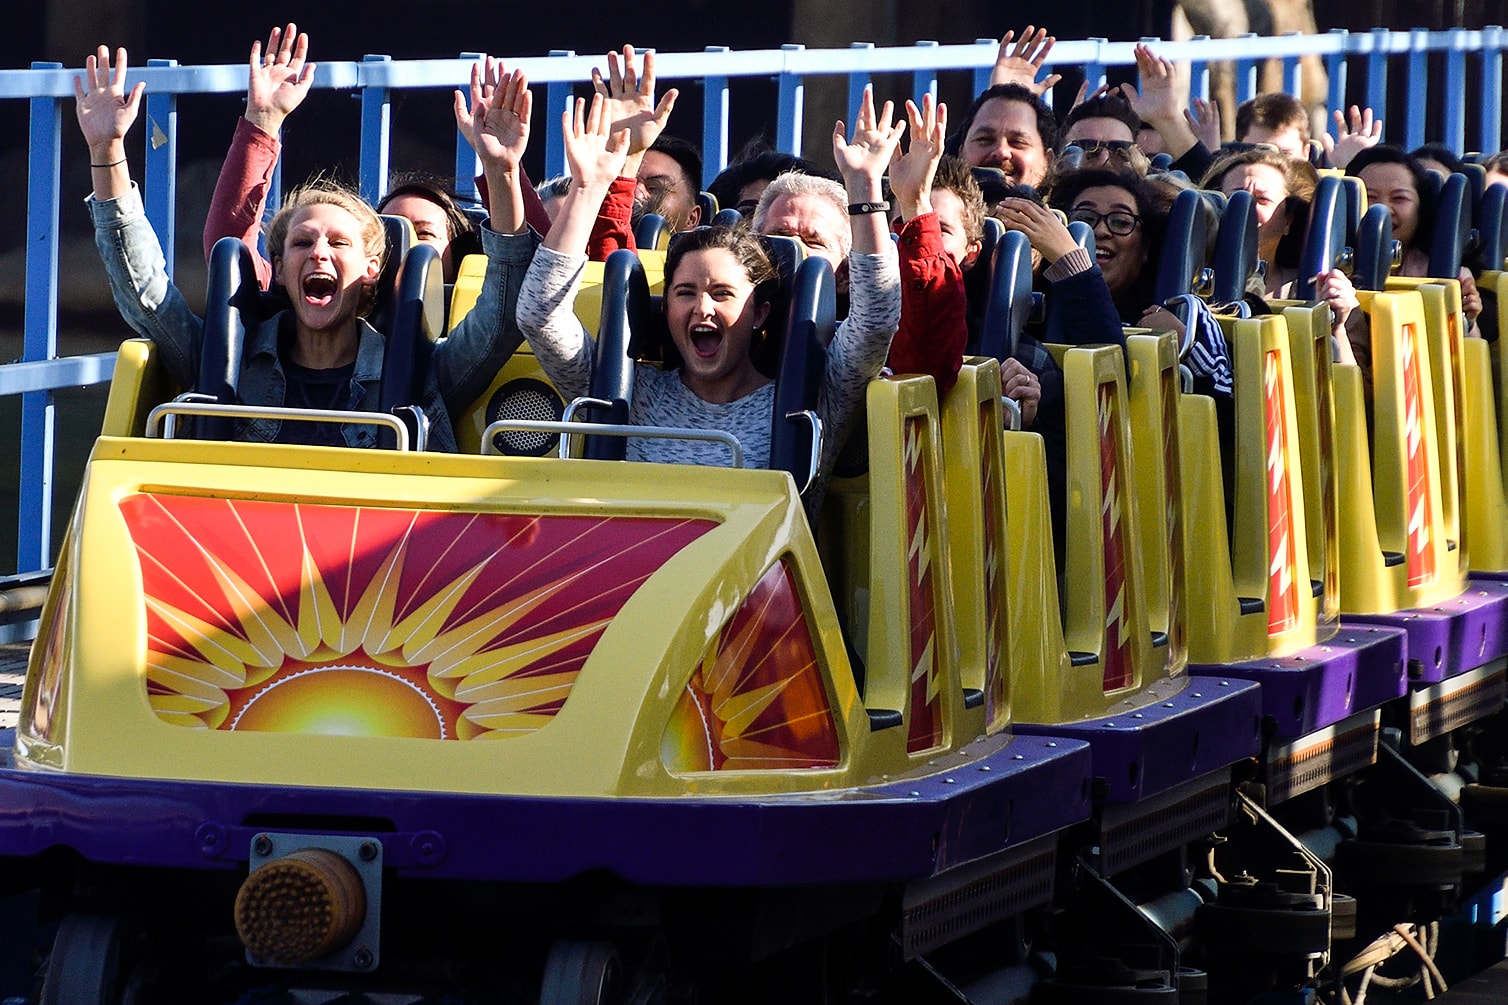 California Attractions and Parks Association Roller Coaster Riders Asked Not To Scream Info